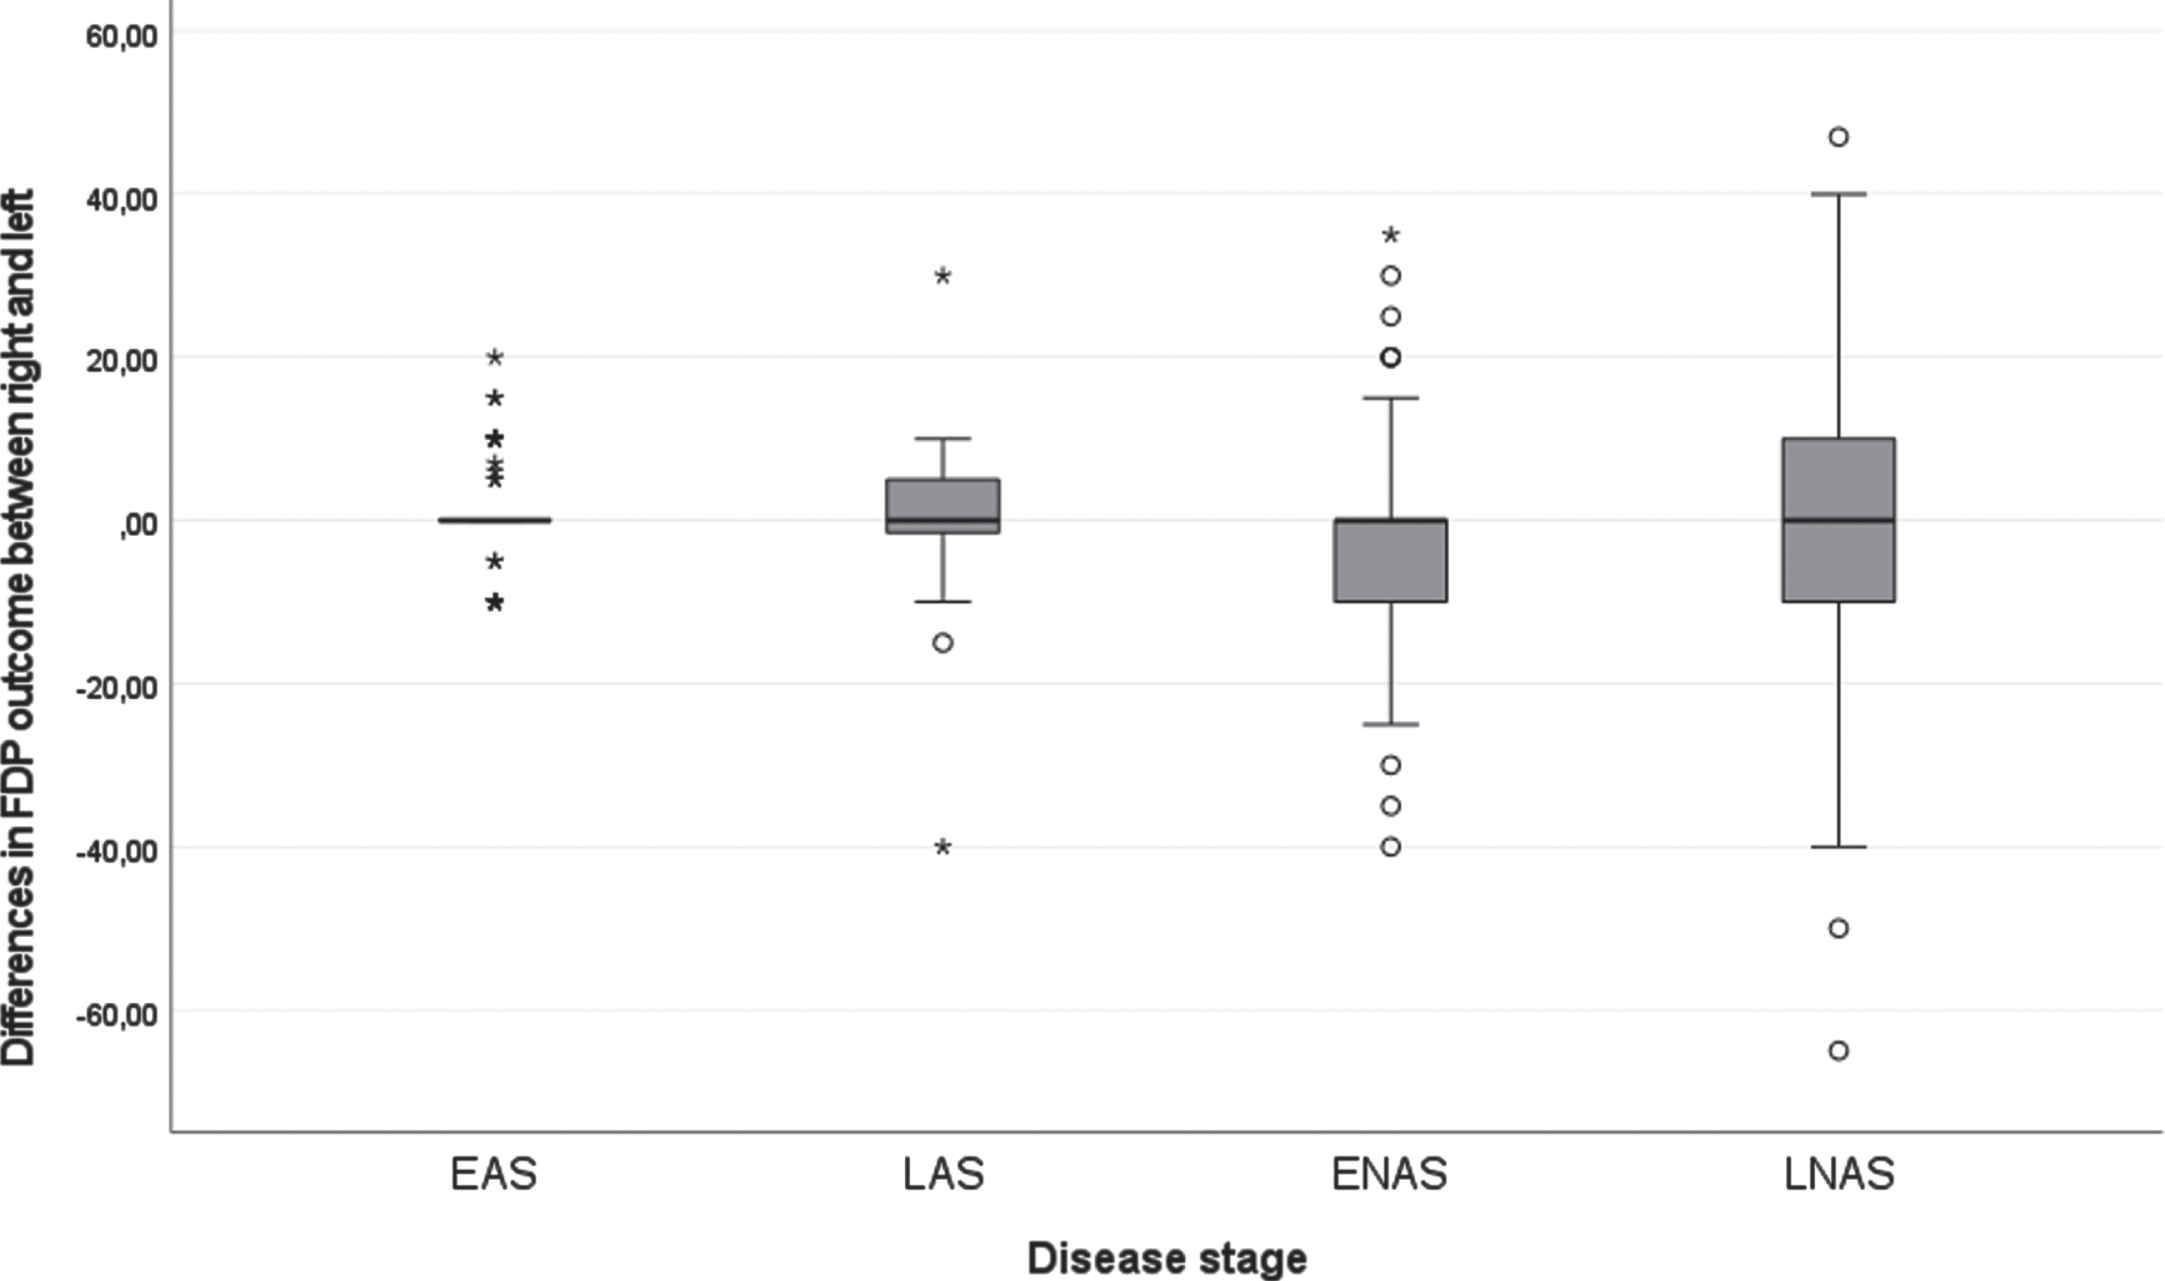 Boxplot of the differences of FDP outcome in the right and left hand of all longitudinal data in degrees for the different disease stages. Note: all longitudinal measurements are included, for this reason, a person may be represented in multiple boxplots as they may have changed from one disease stage to the next during the course of the study. EAS: Early ambulatory stage, LAS: Late ambulatory stage, ENAS: Early non-ambulatory stage, LNAS: Late non-ambulatory stage.